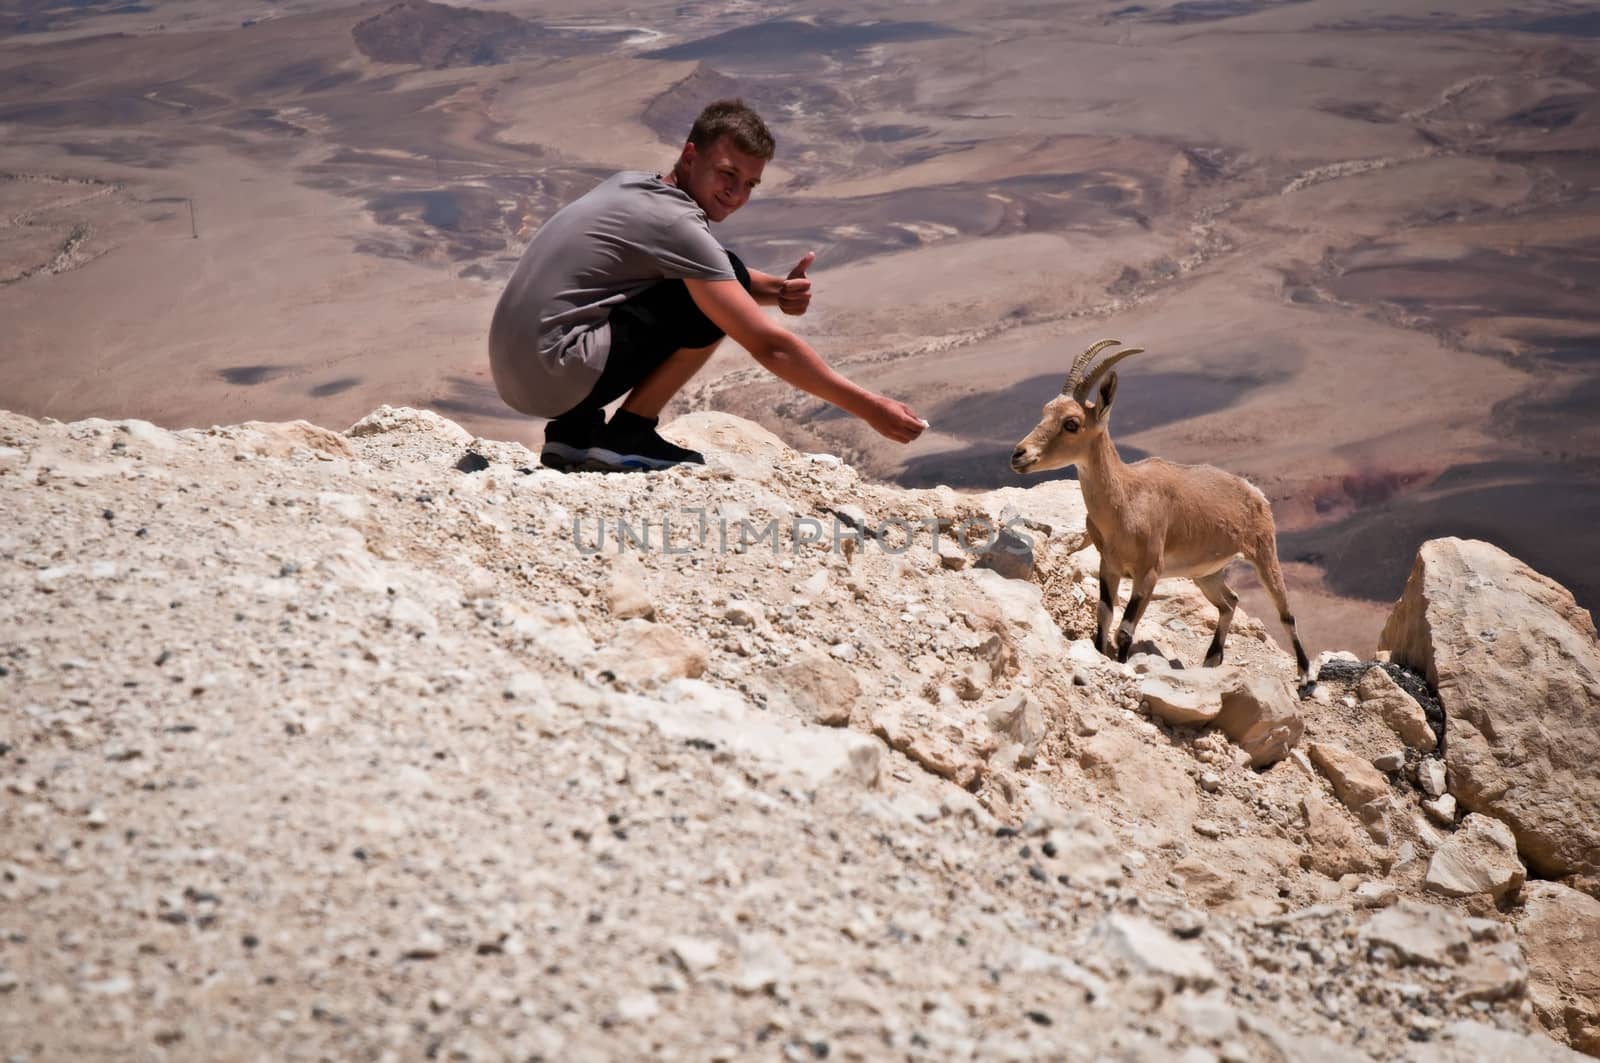 Mountain goat and teenager . by LarisaP